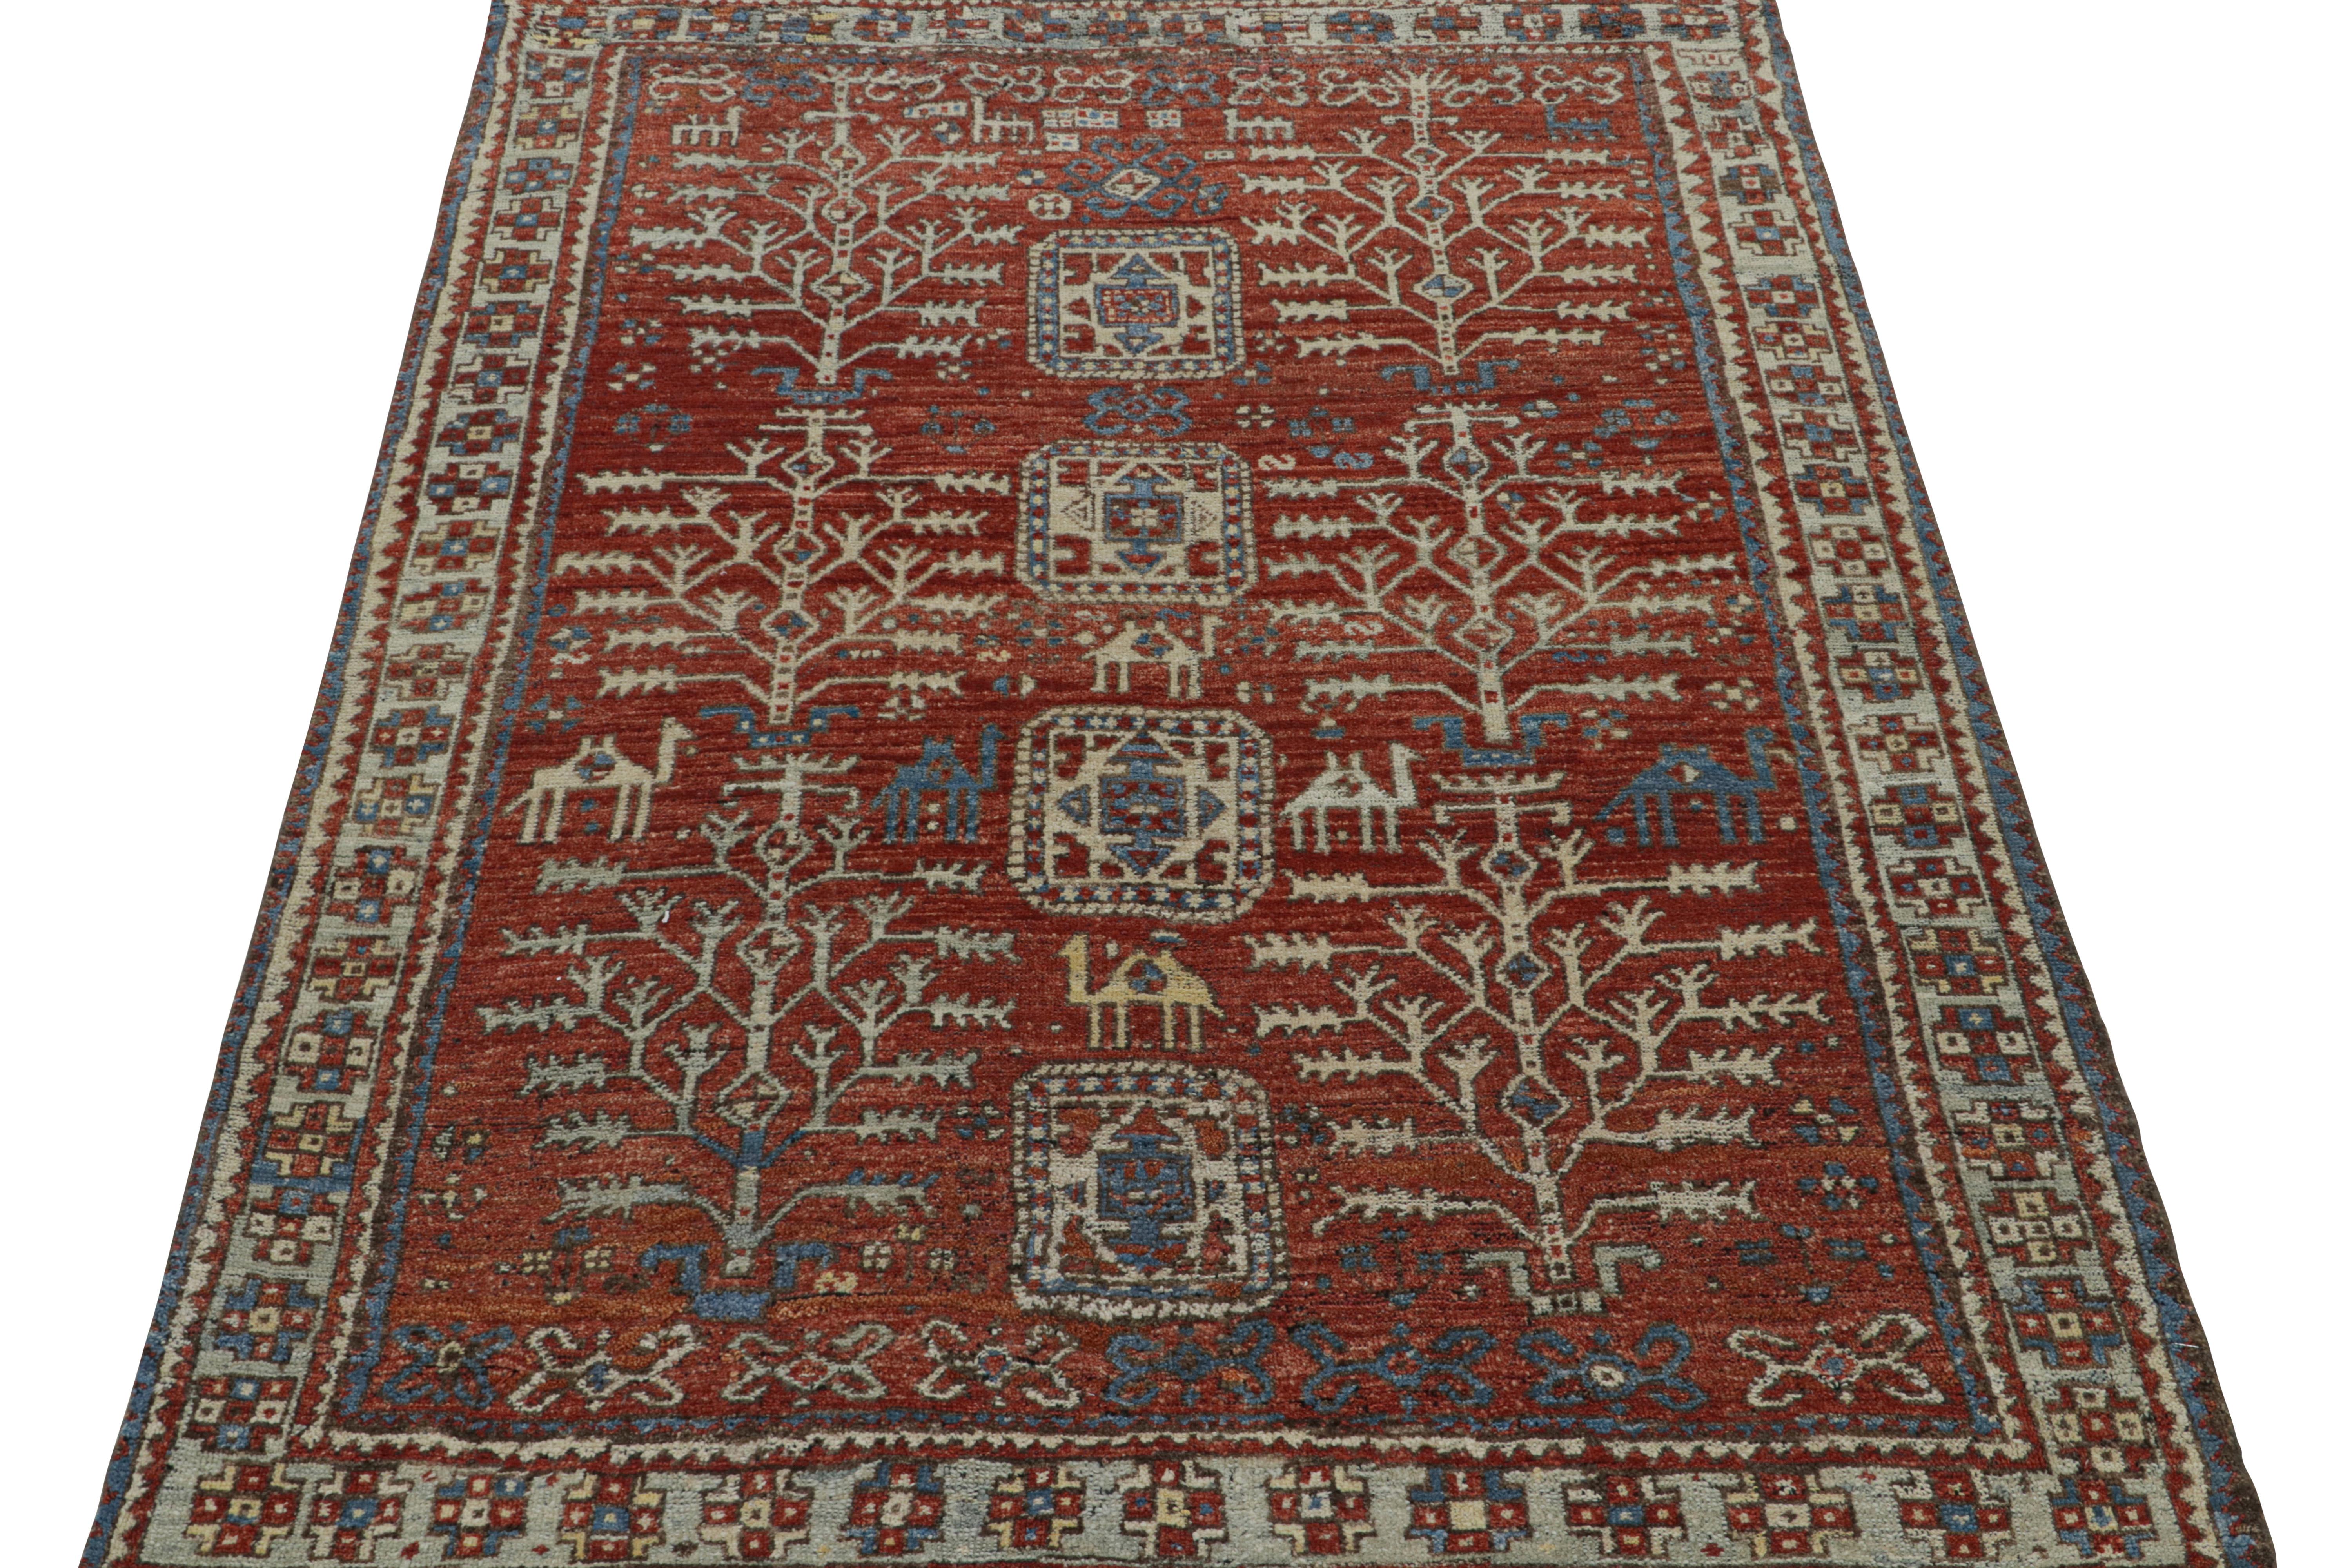 Indian Rug & Kilim’s Tribal Style Rug in Red with Pictorials and Geometric Patterns For Sale